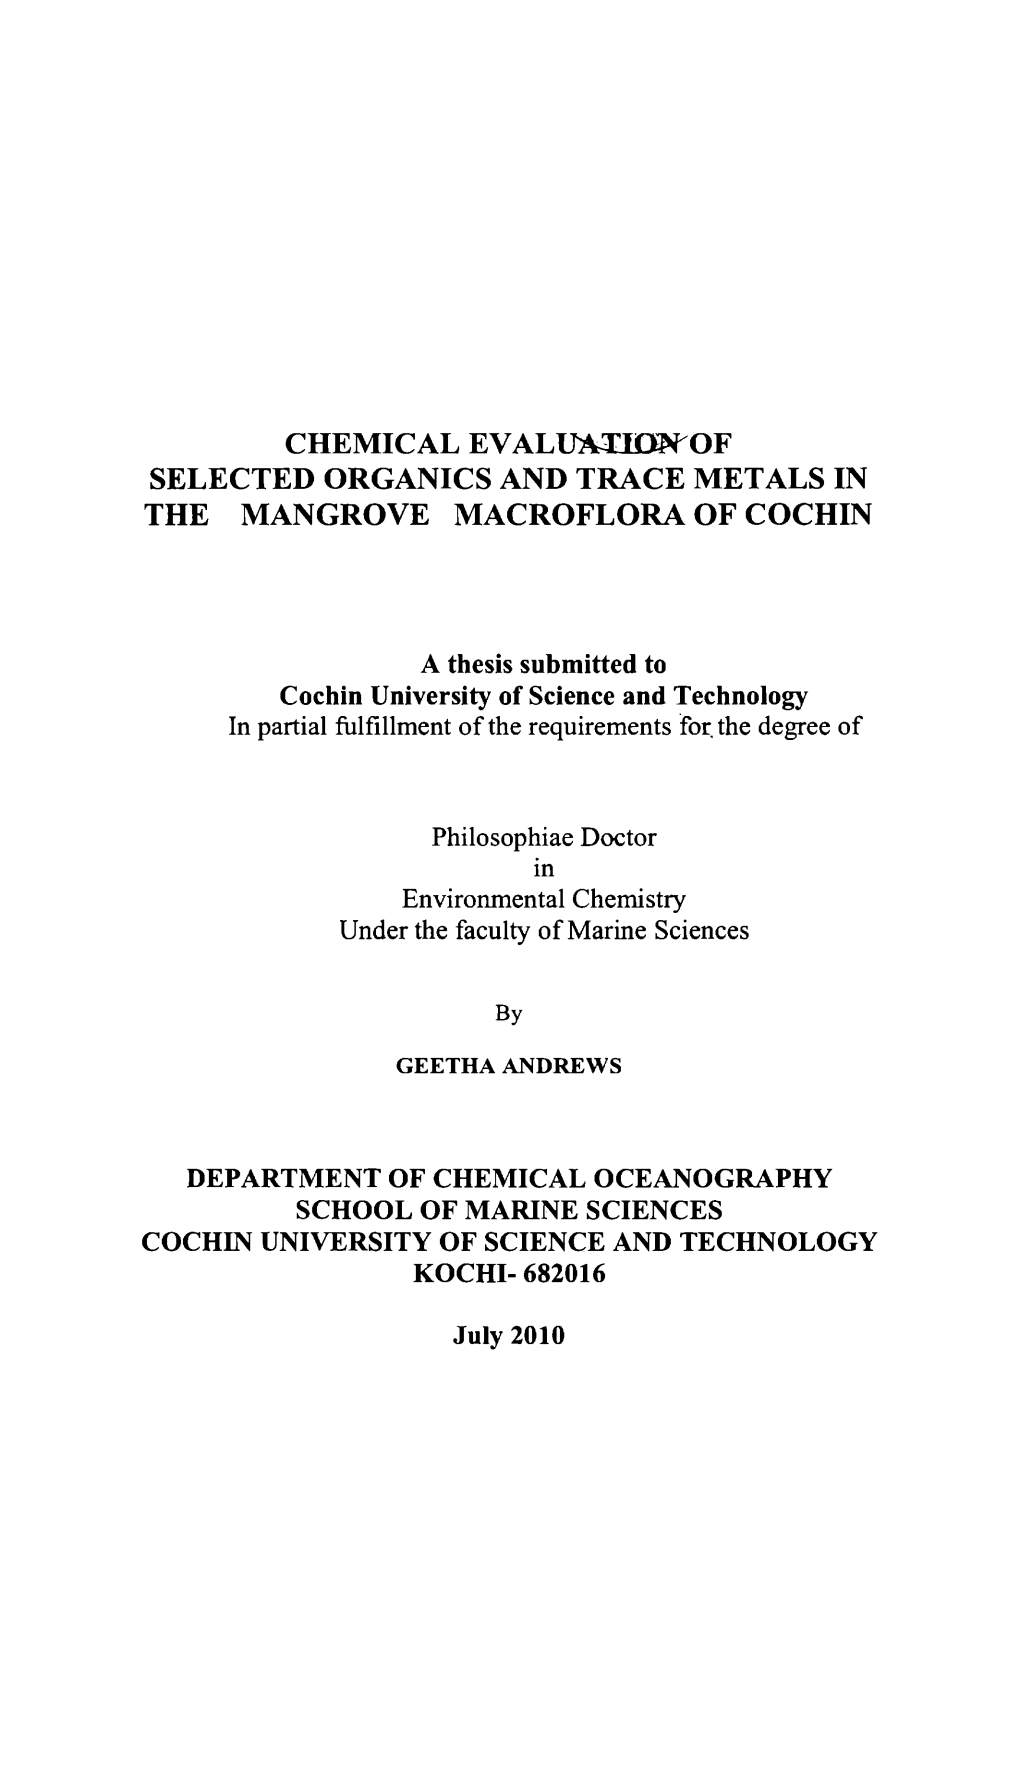 Chemical Evaluation of Selected Organics and Trace Metals in the Mangrove Macroﬂora of Cochin Is a Bonafide Record of the Research Work Carried out by Smt